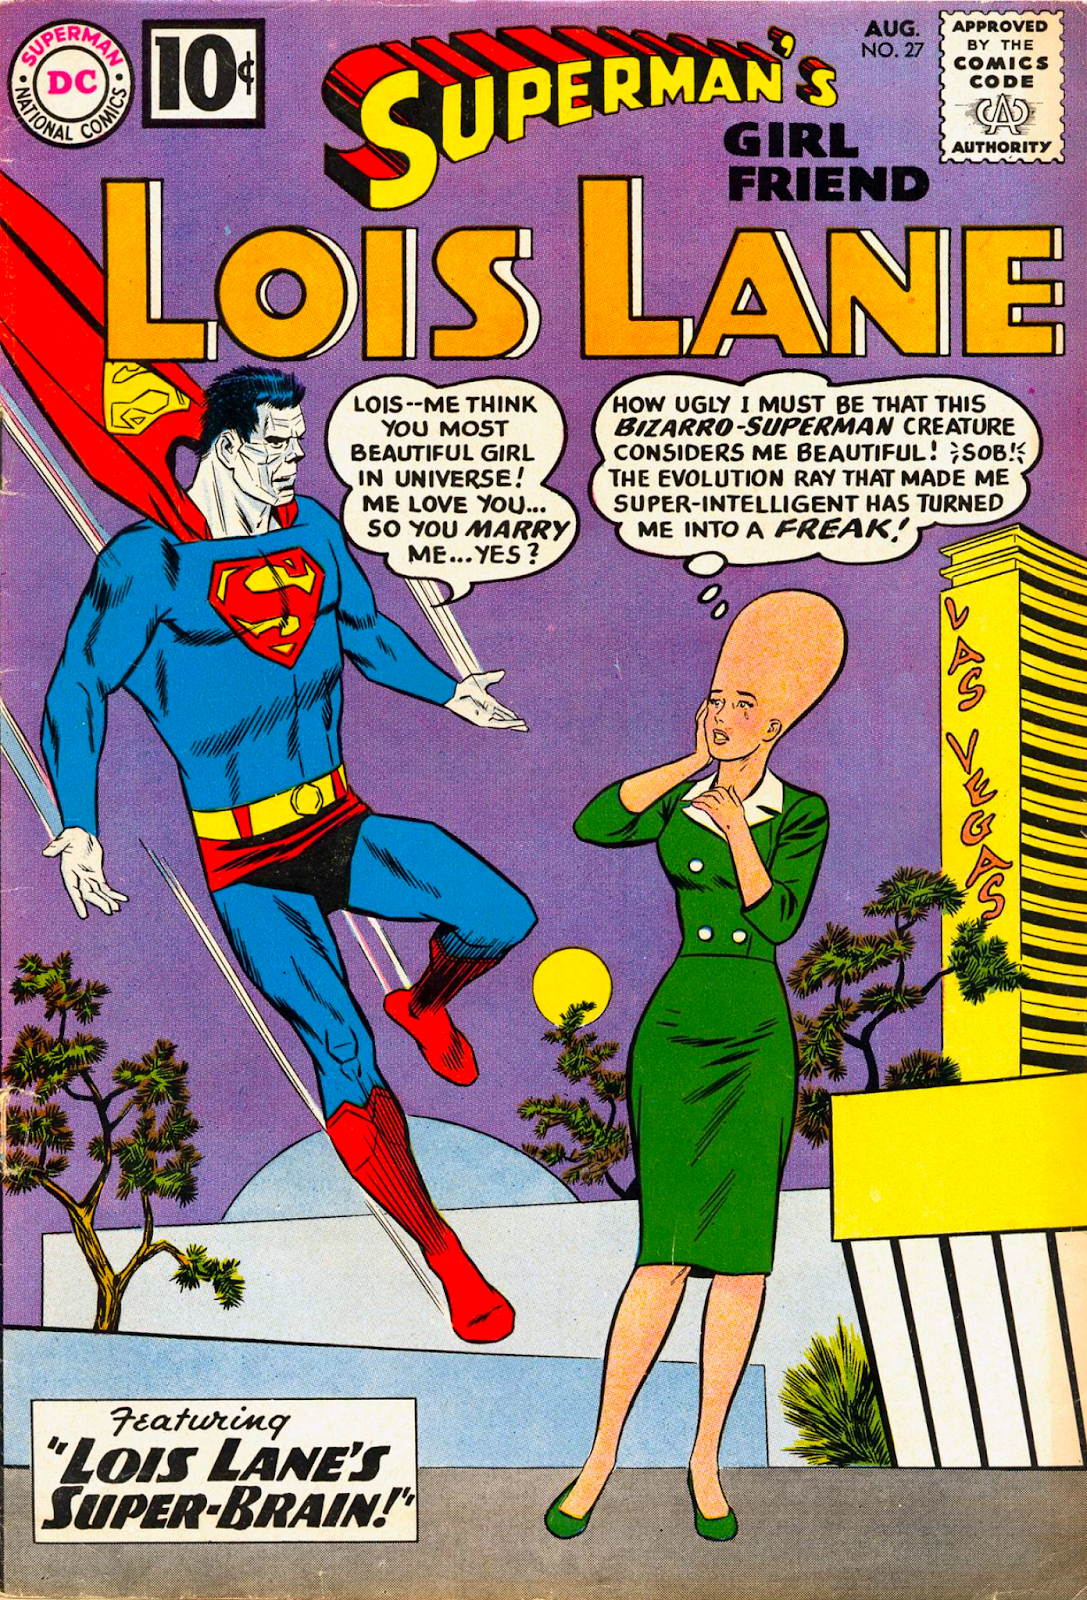 Weird Science DC Comics: Retro Review: Superman's Girl Friend Lois Lane #27  (1961) Review and **SPOILERS**